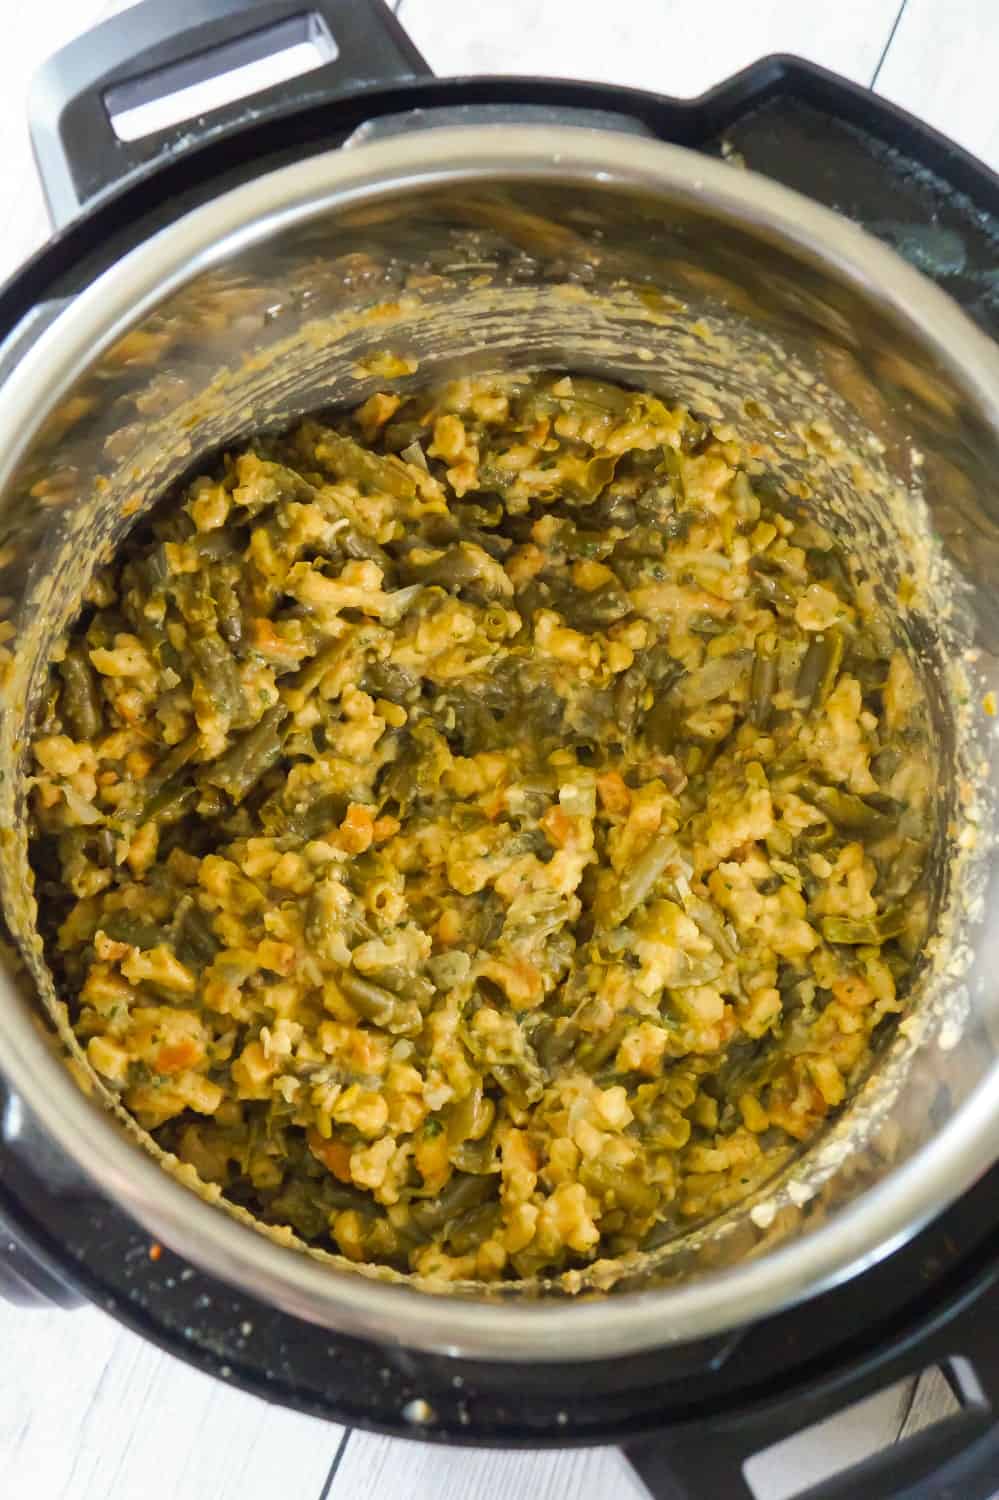 Instant Pot Green Bean Casserole with Stuffing is an easy pressure cooker side dish recipe made with cut green beans, cream of mushroom soup and Stove Top stuffing mix.